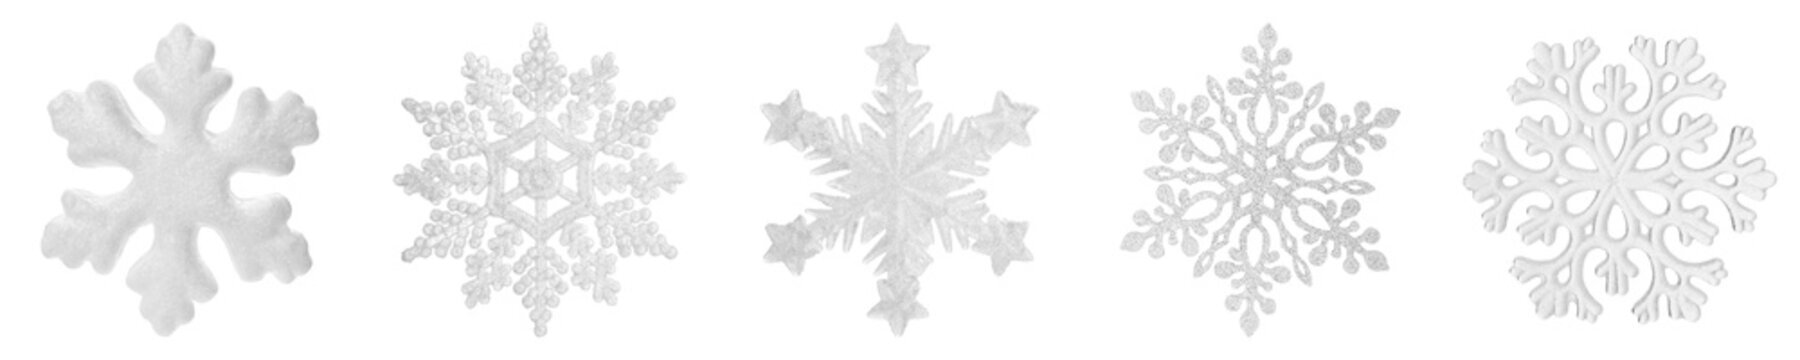 Set of beautiful decorative snowflakes on white background. Banner design